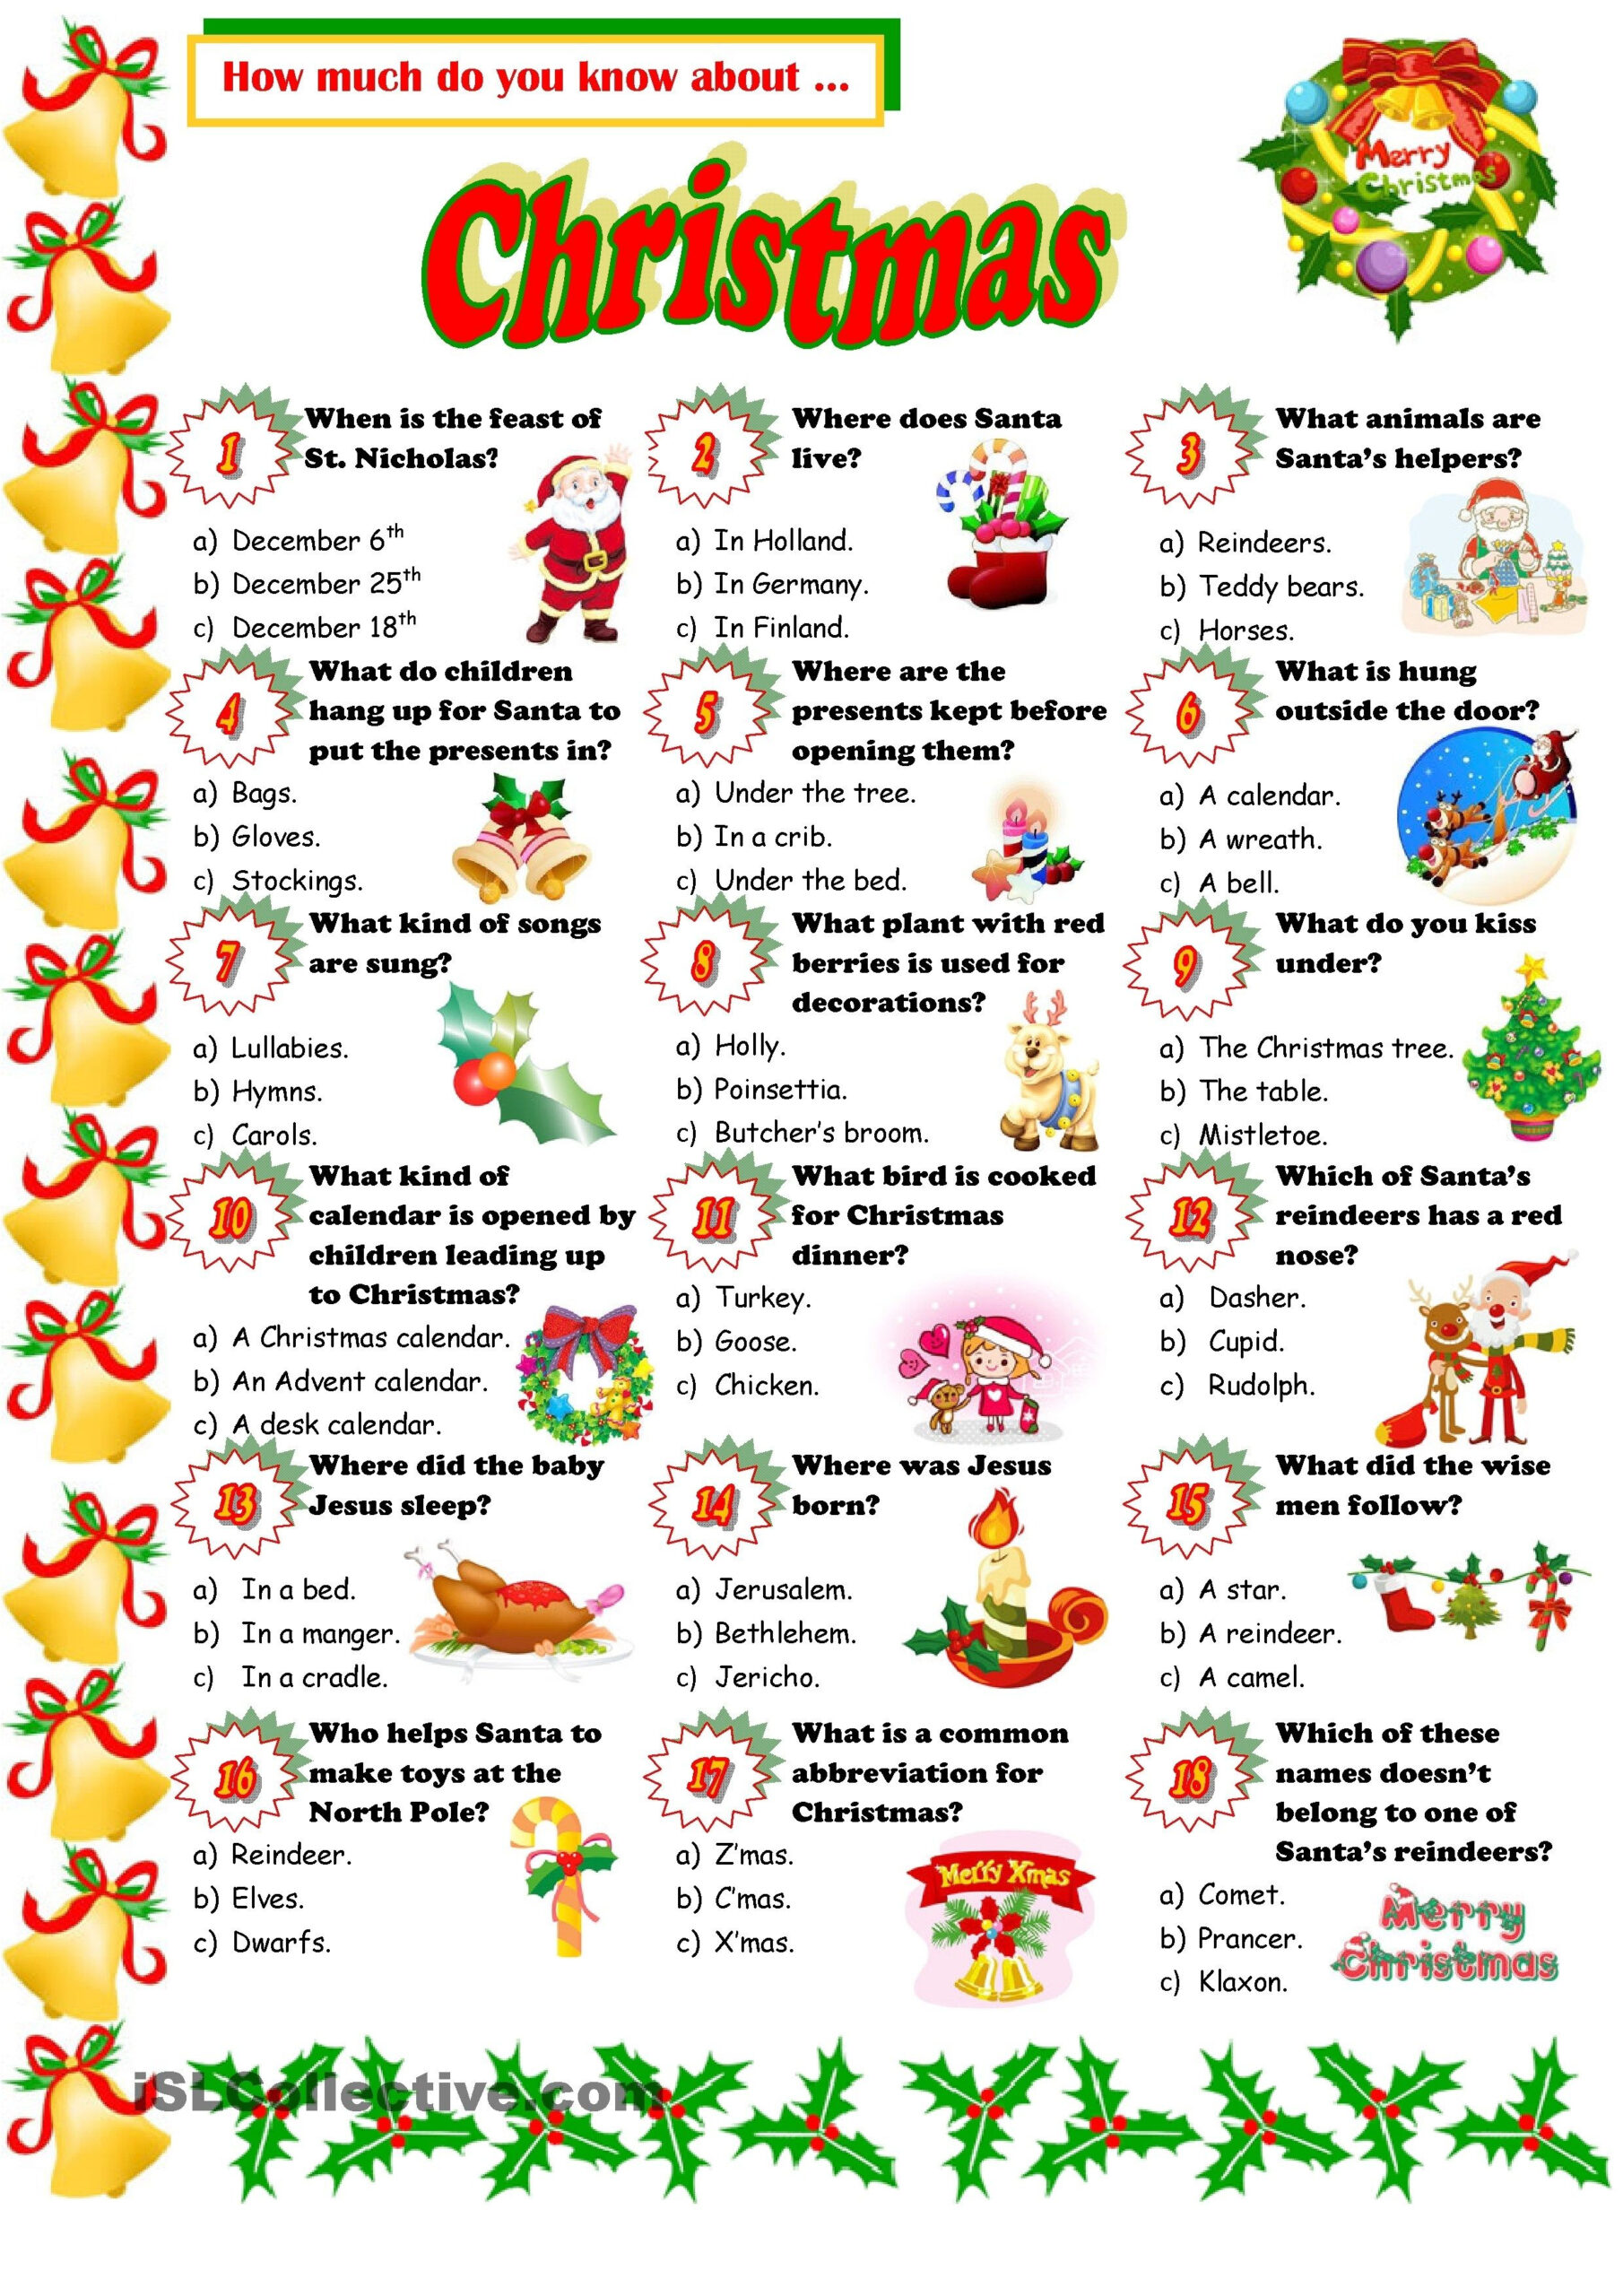 Trivia Christmas Quiz Questions And Answers Rztfqk 